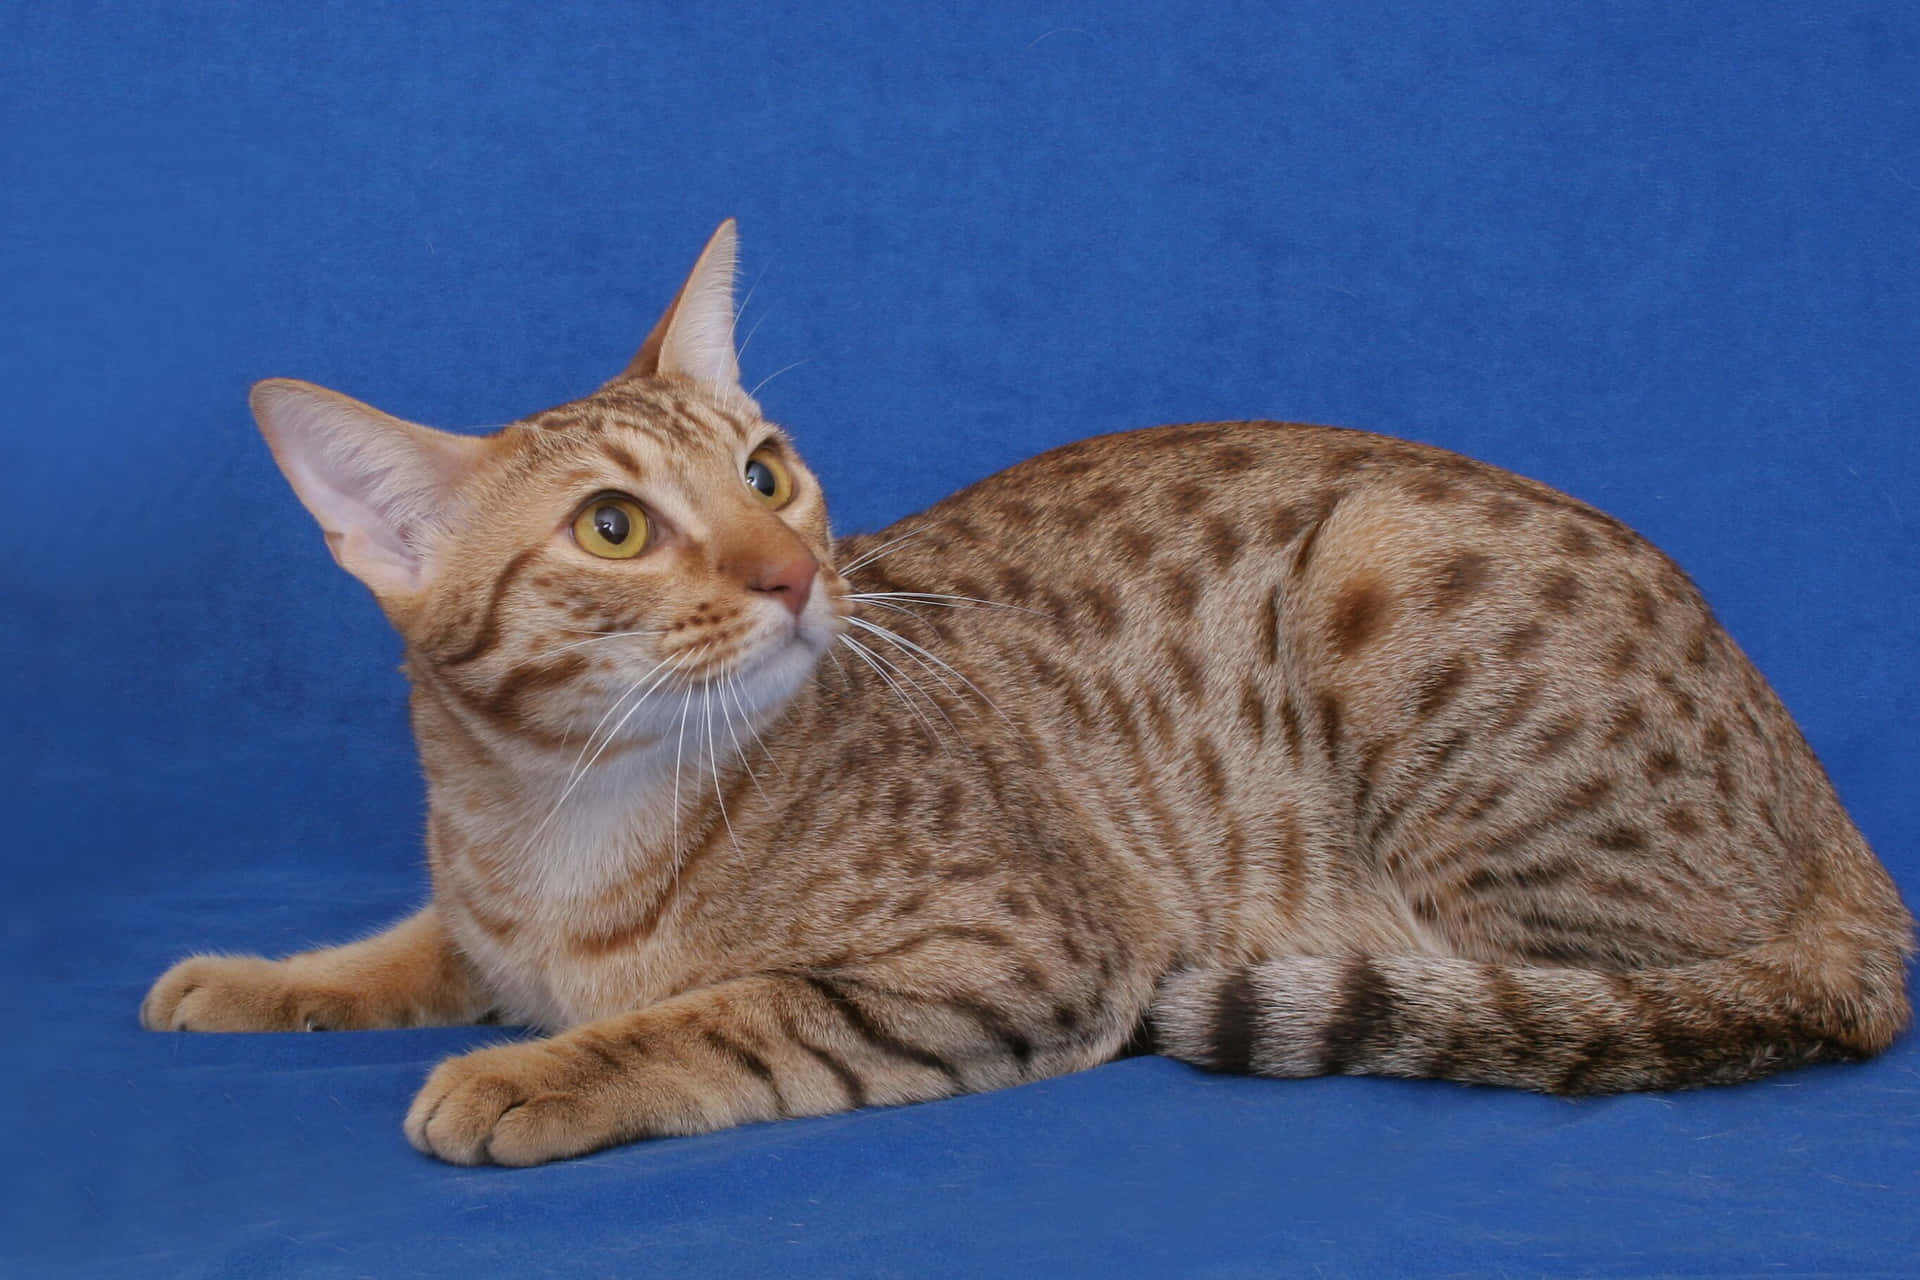 Caption: Stunning Ocicat showing its distinctive markings and muscular build Wallpaper